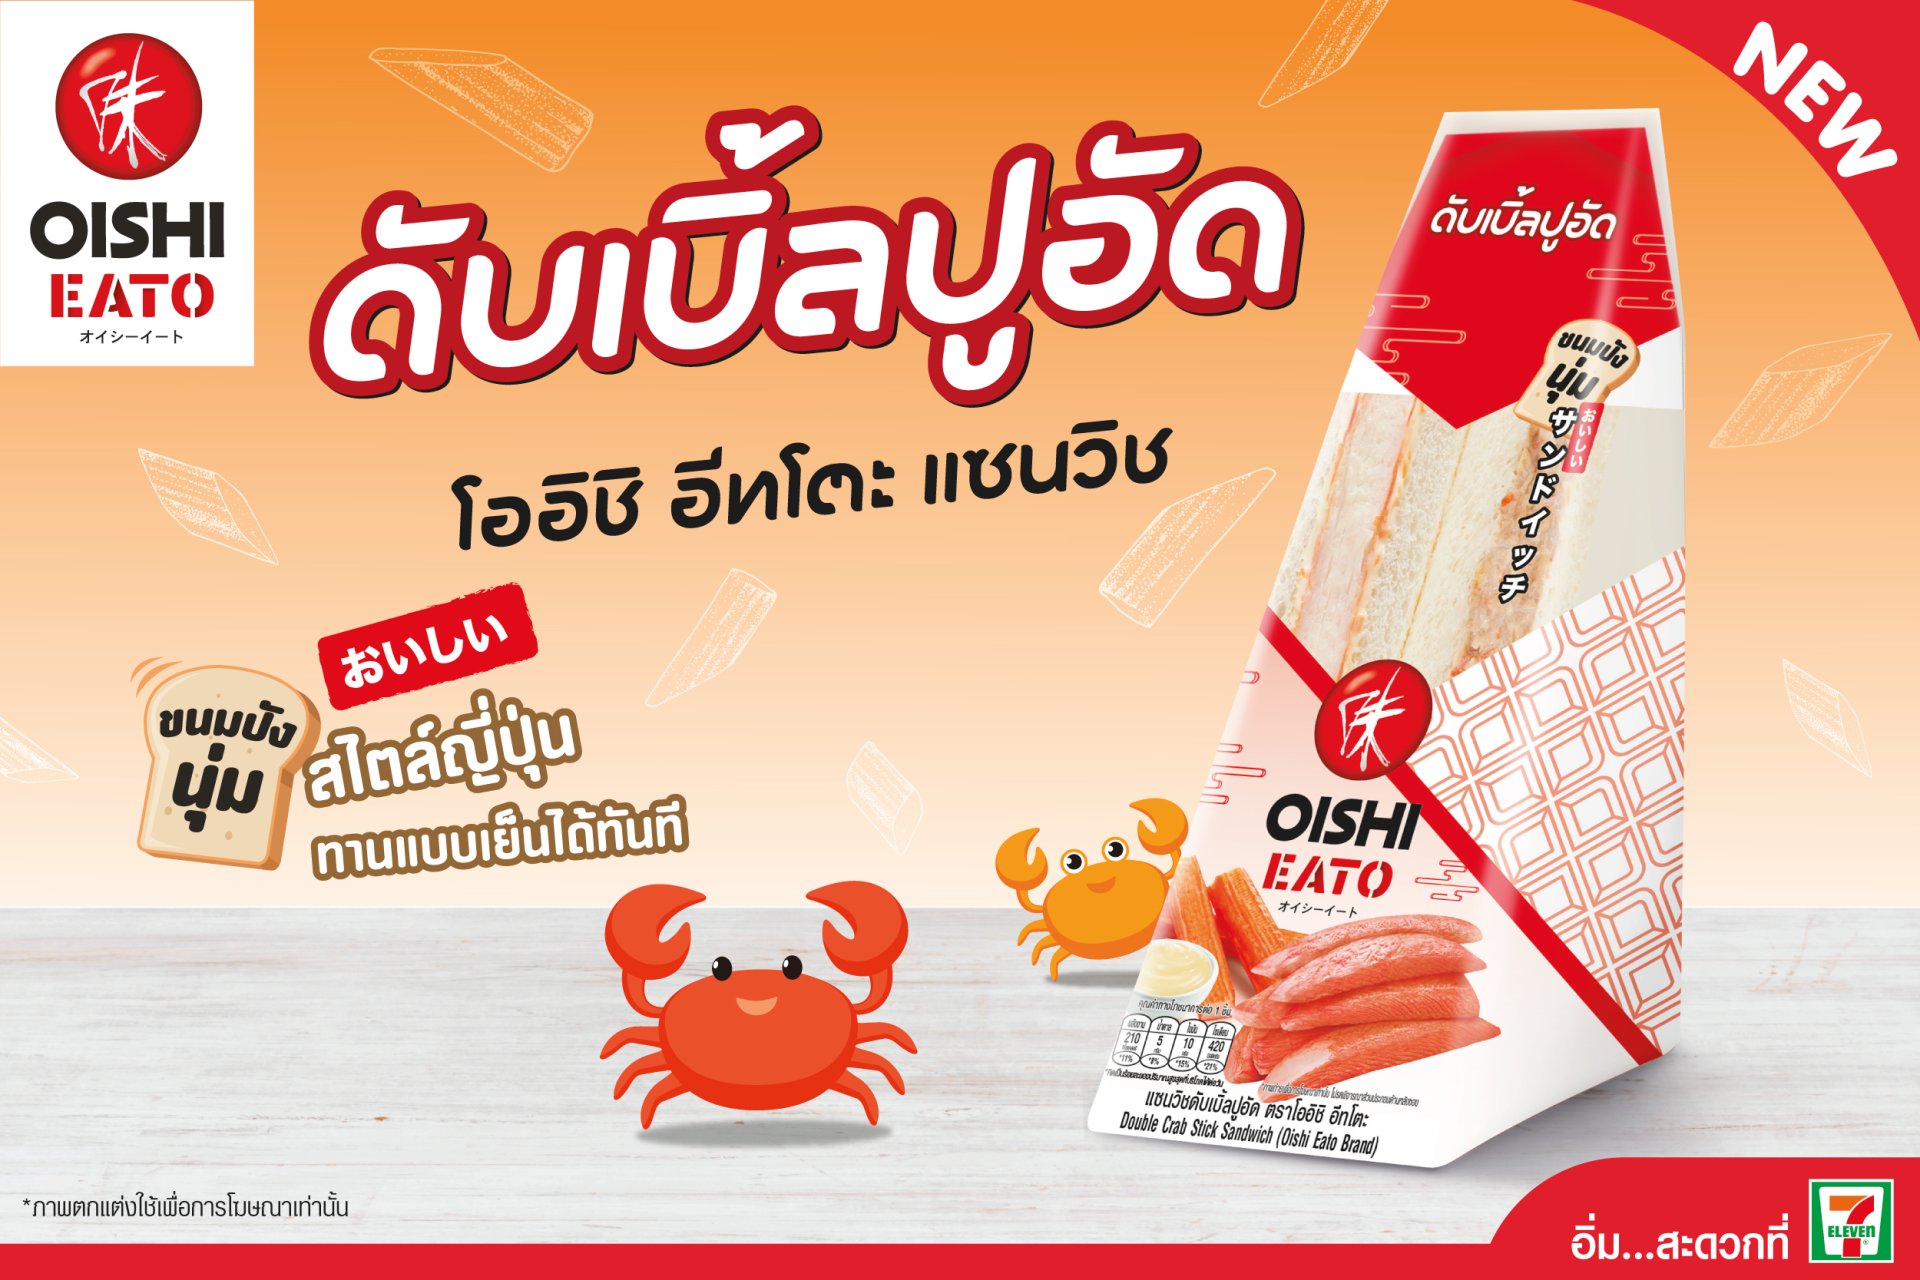 playing-new-product-oishi-eato-double-crabstick-sandwich